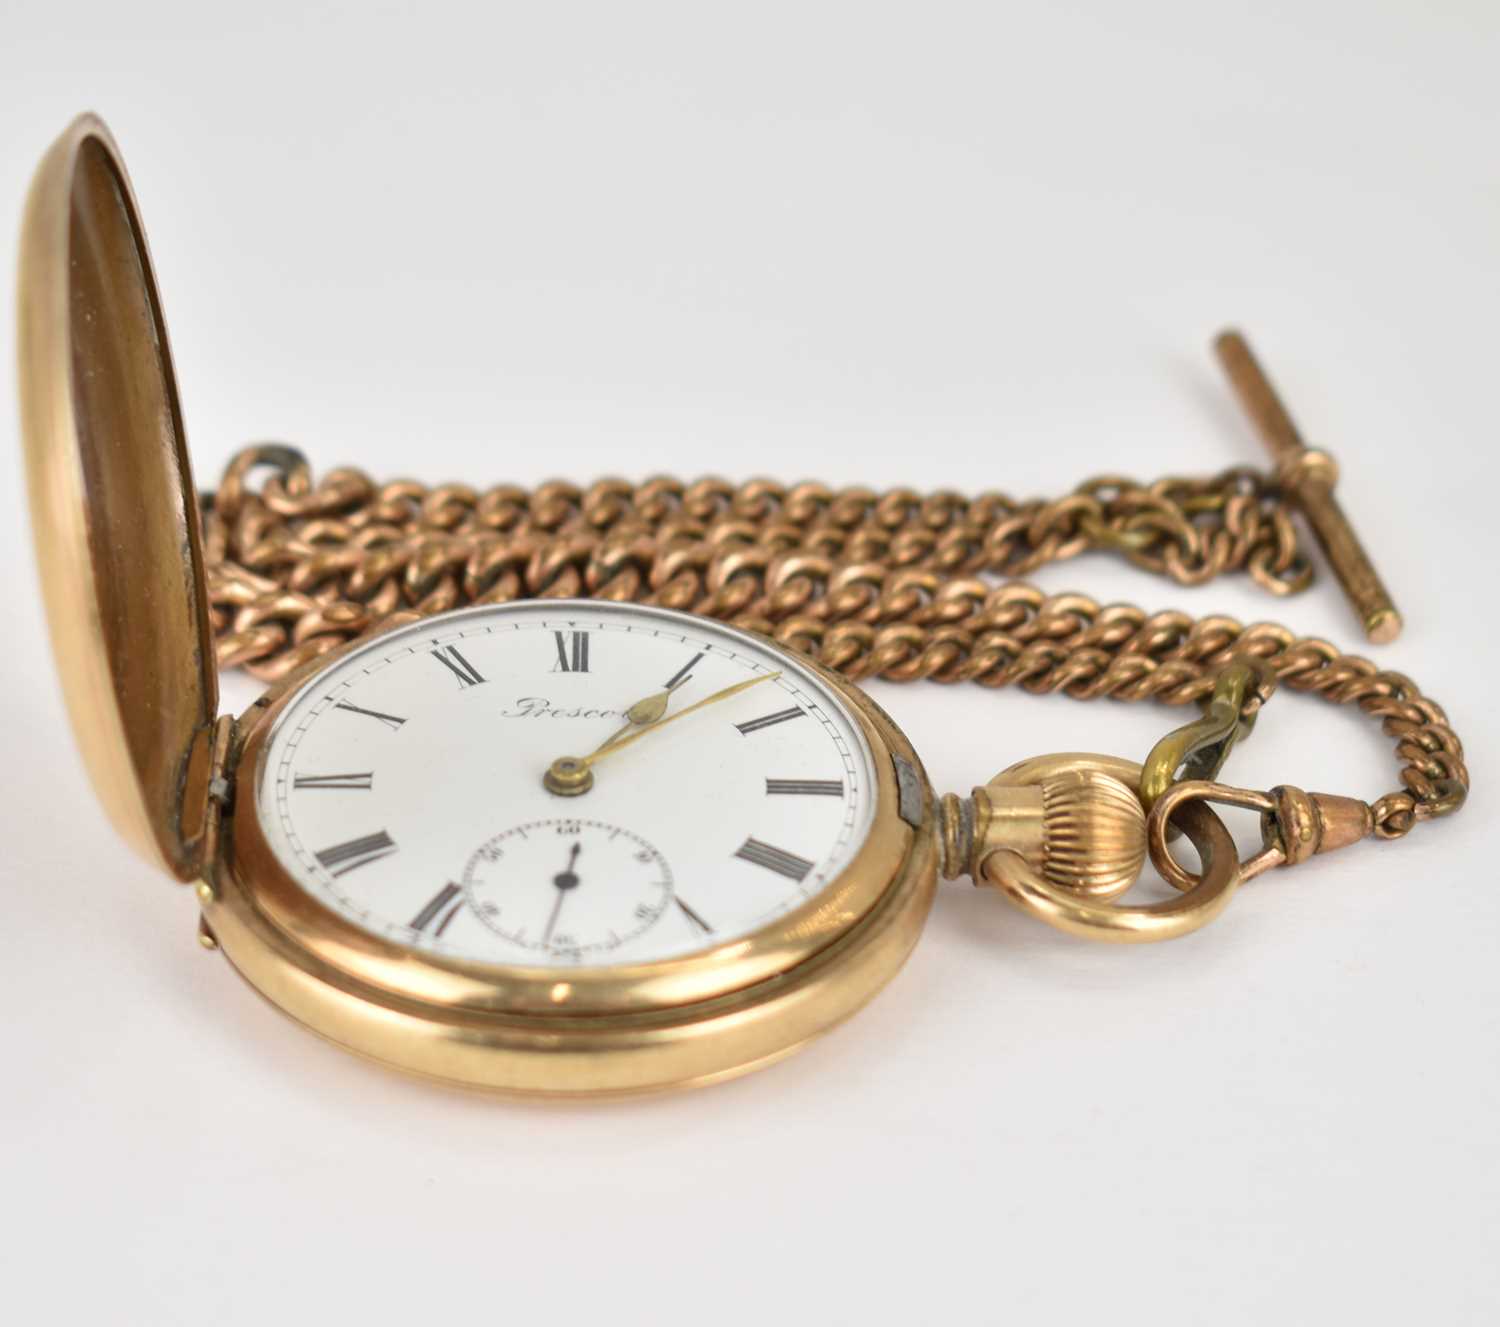 LANCASHIRE WATCH CO; a Prescot gold plated full hunter pocket watch, the white enamelled dial set - Image 2 of 3